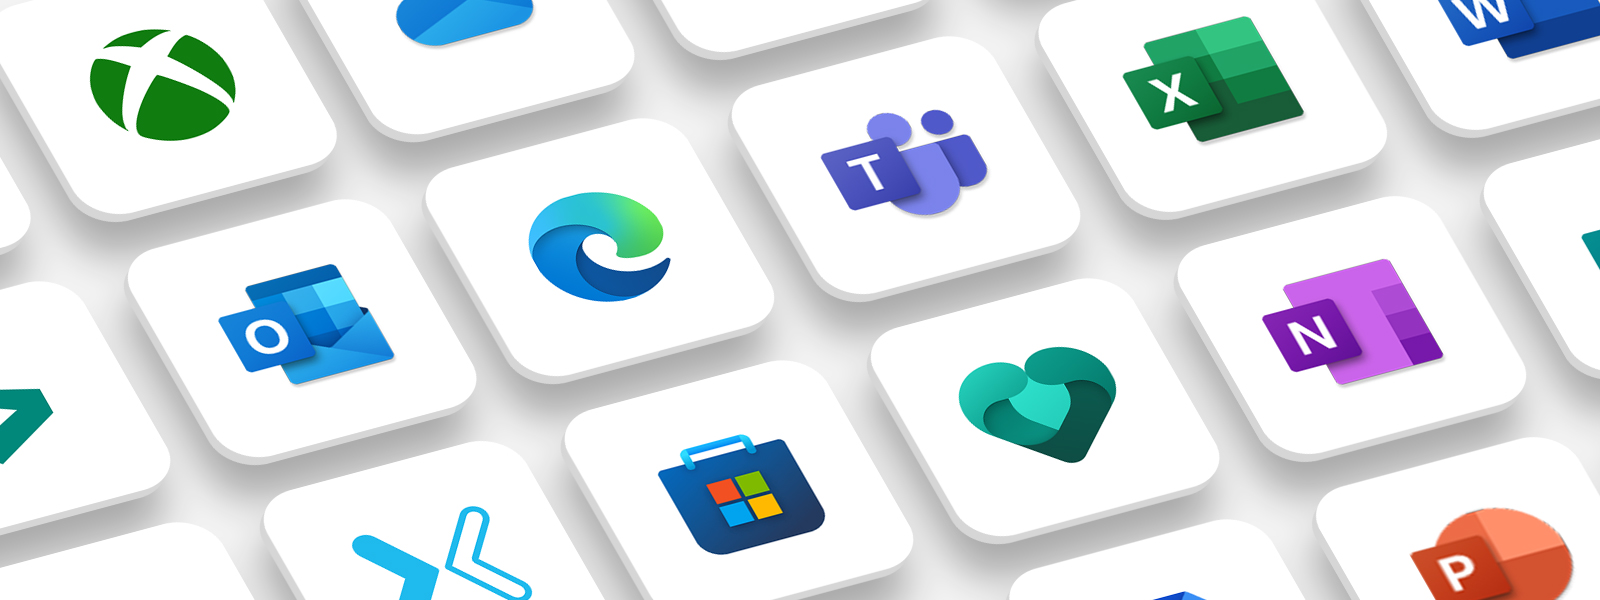 Many colorful Microsoft application icons on white background